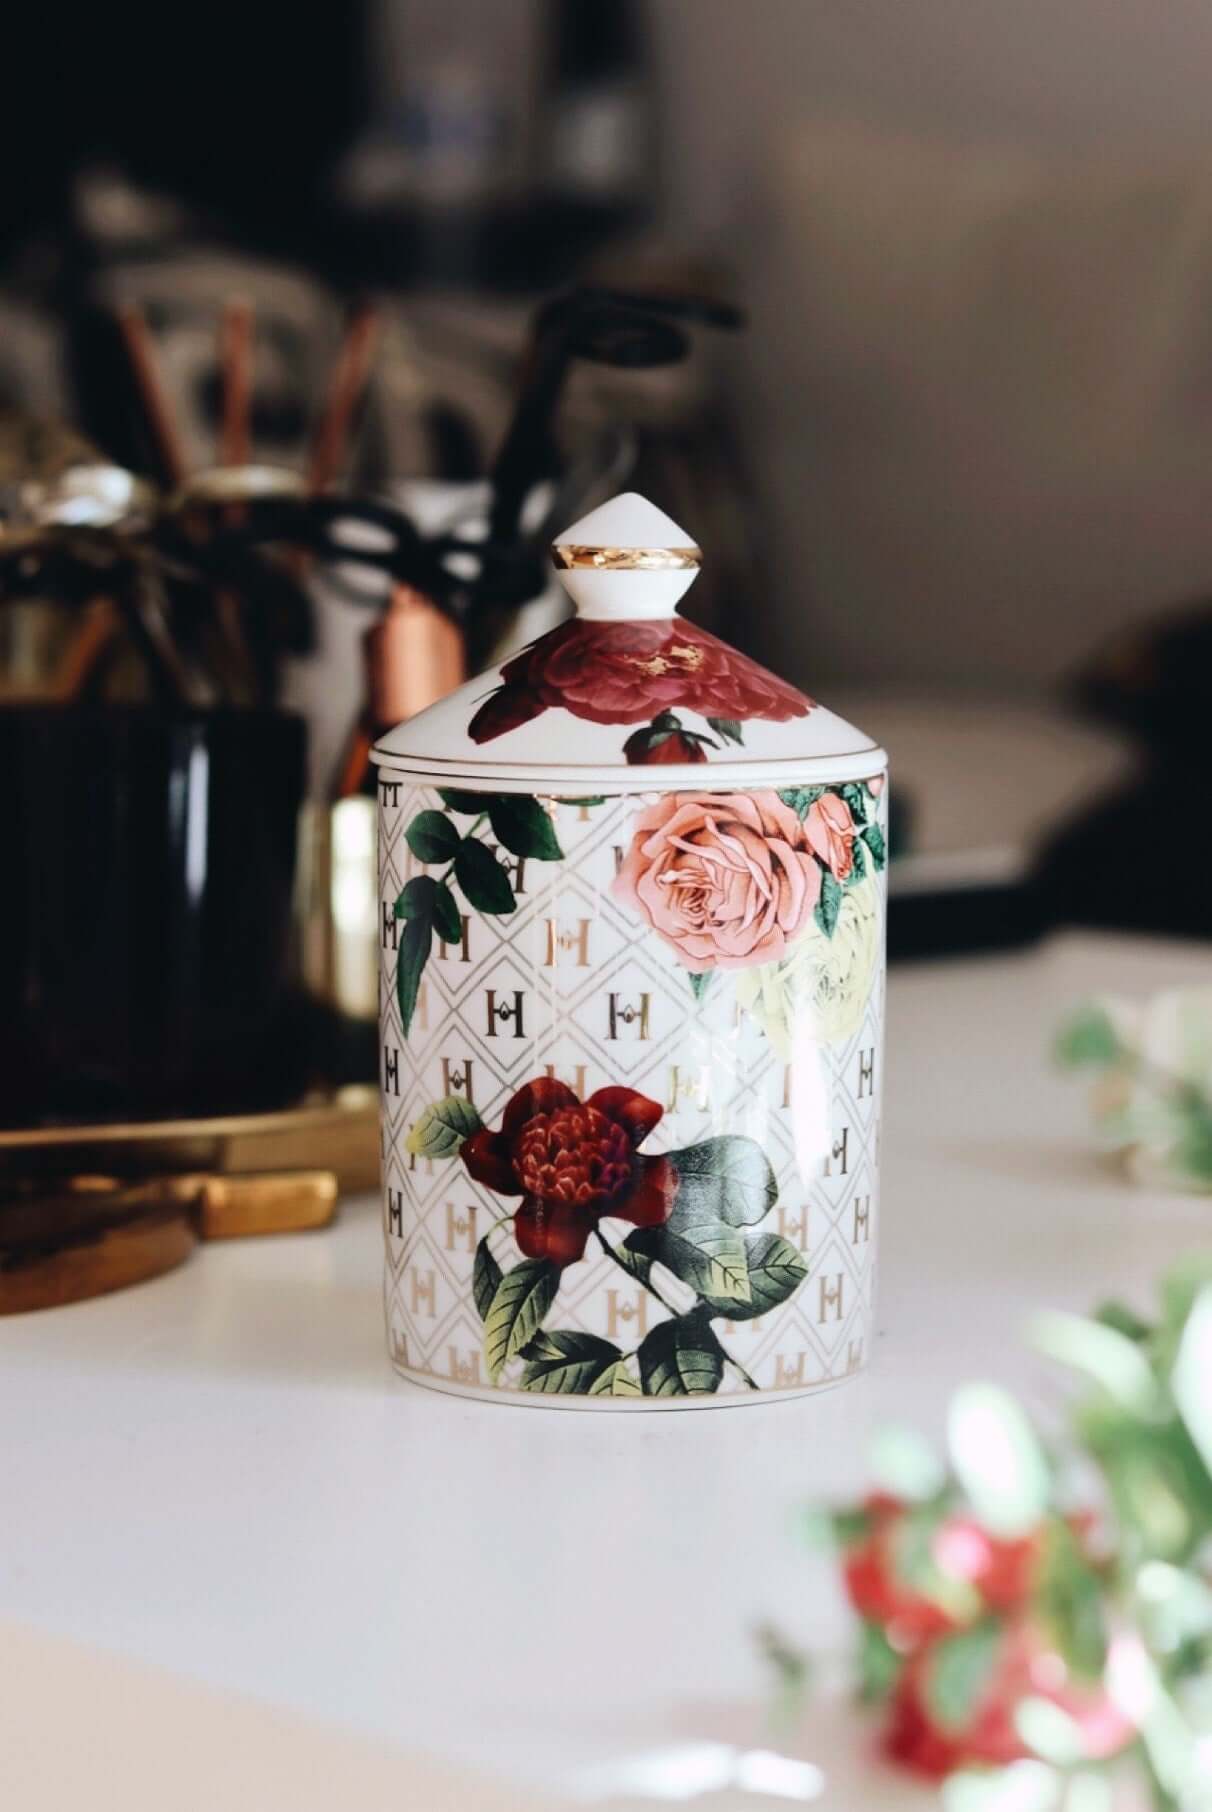 A stunning lifestyle image of Our “Lady Day” White Floral Ceramic Luxury Candle with lid  sitting on a white table with flowers.